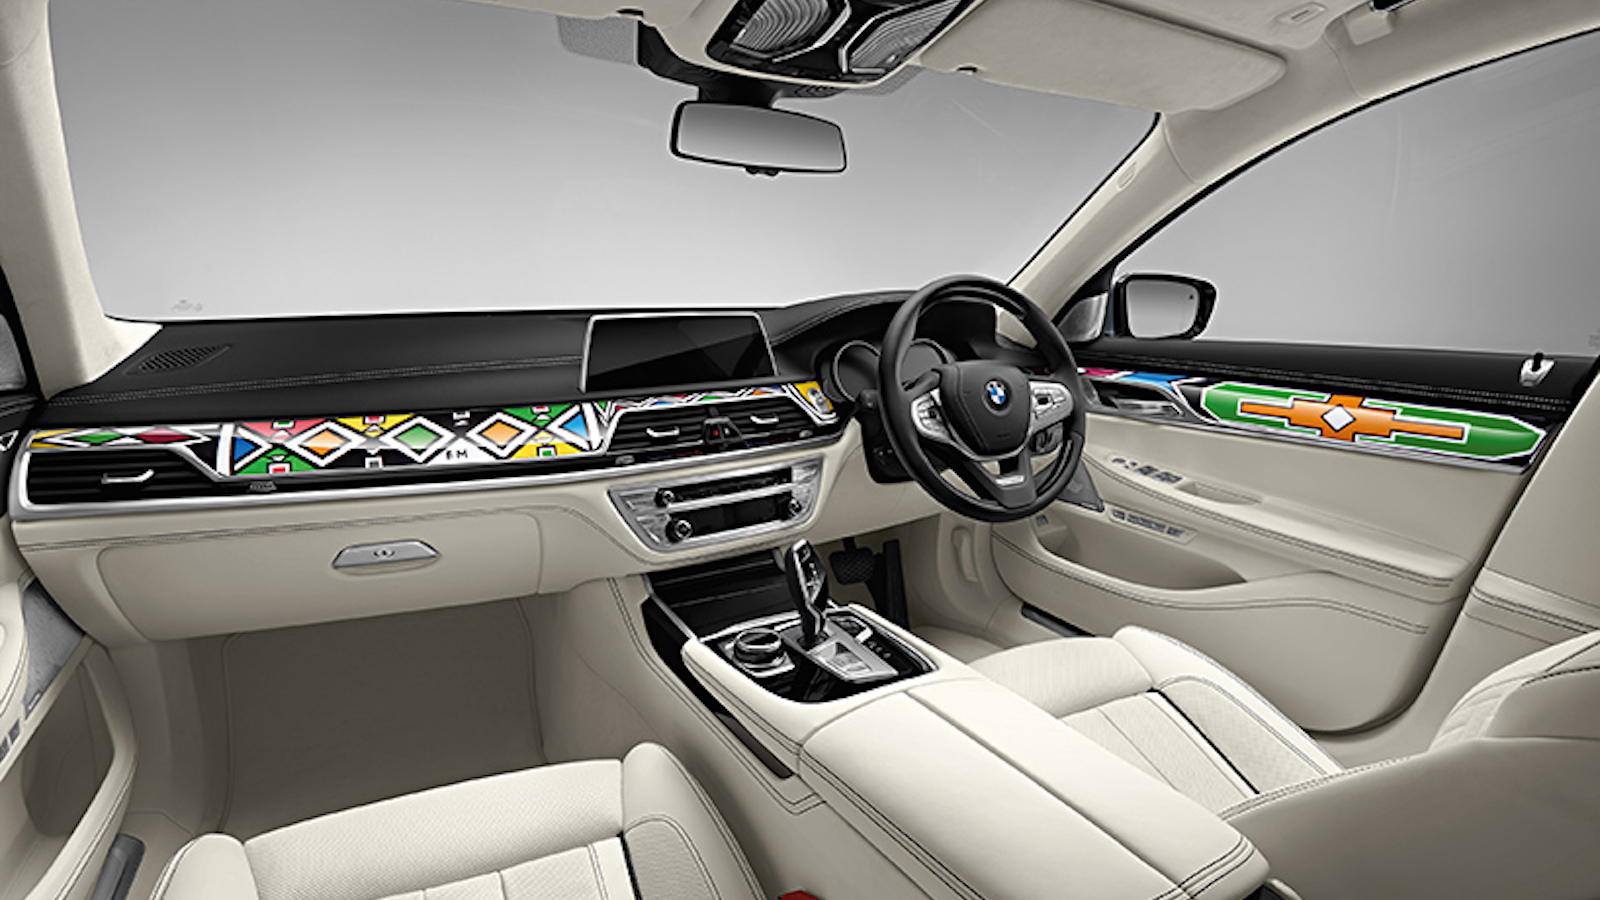 81 Year Old South African Artist Paints Interior Of Bmw Sedan